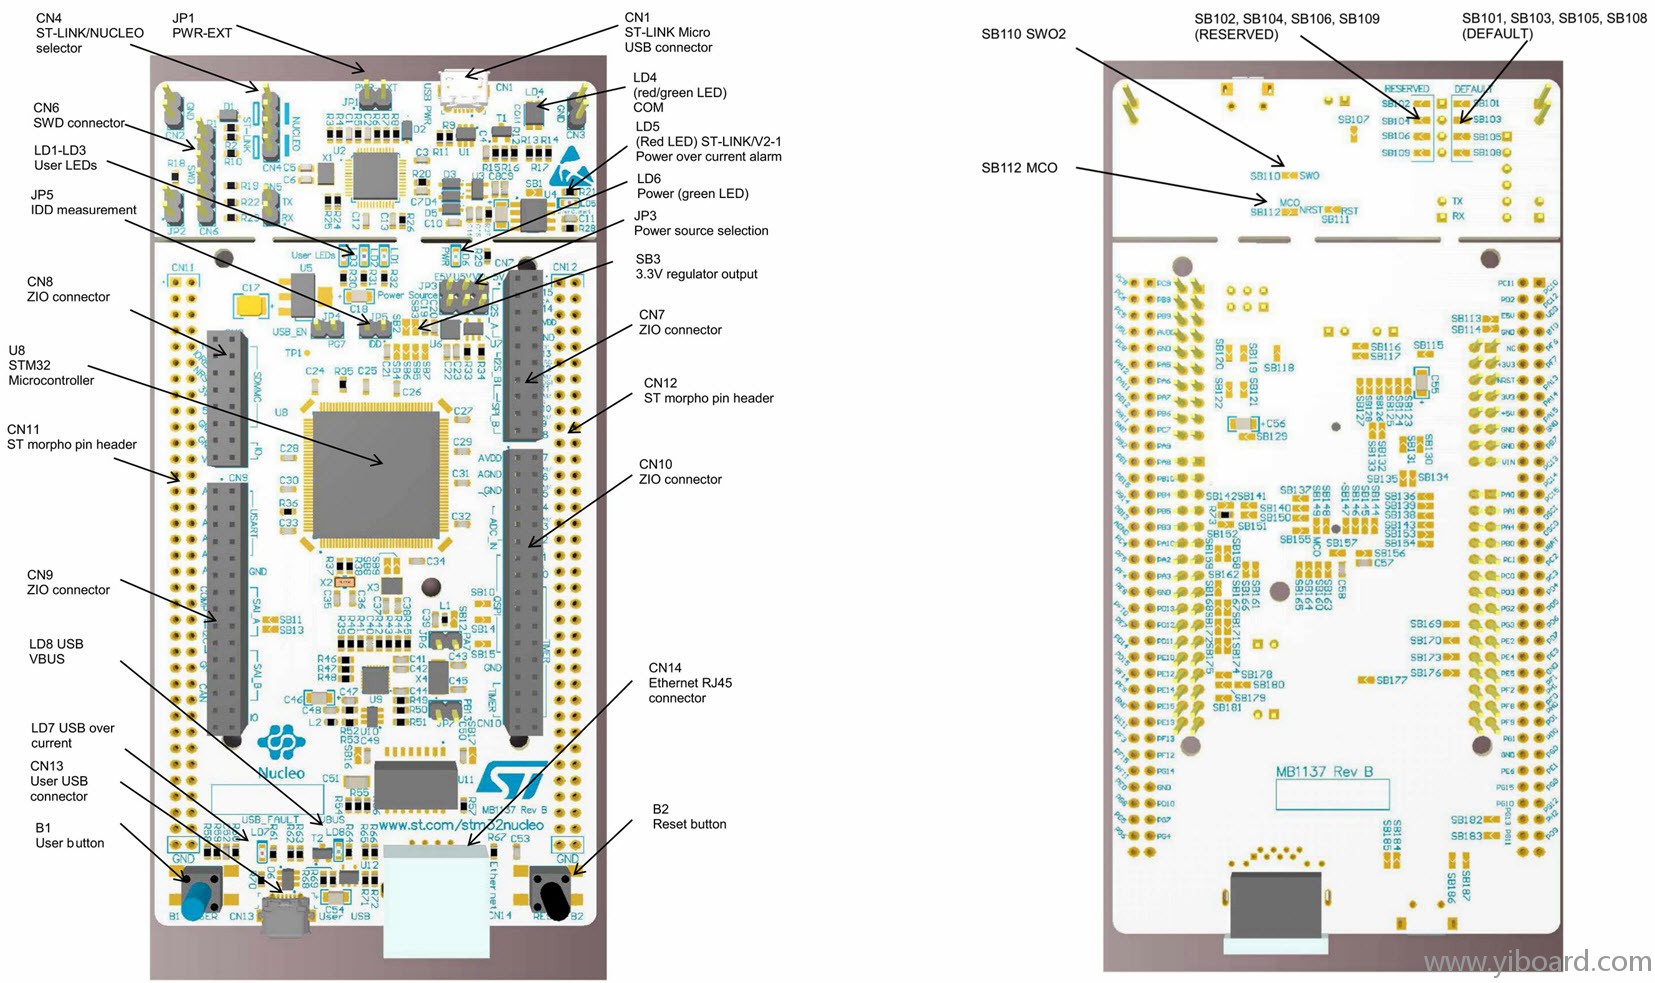 Nucleo-144-board-overview.jpg